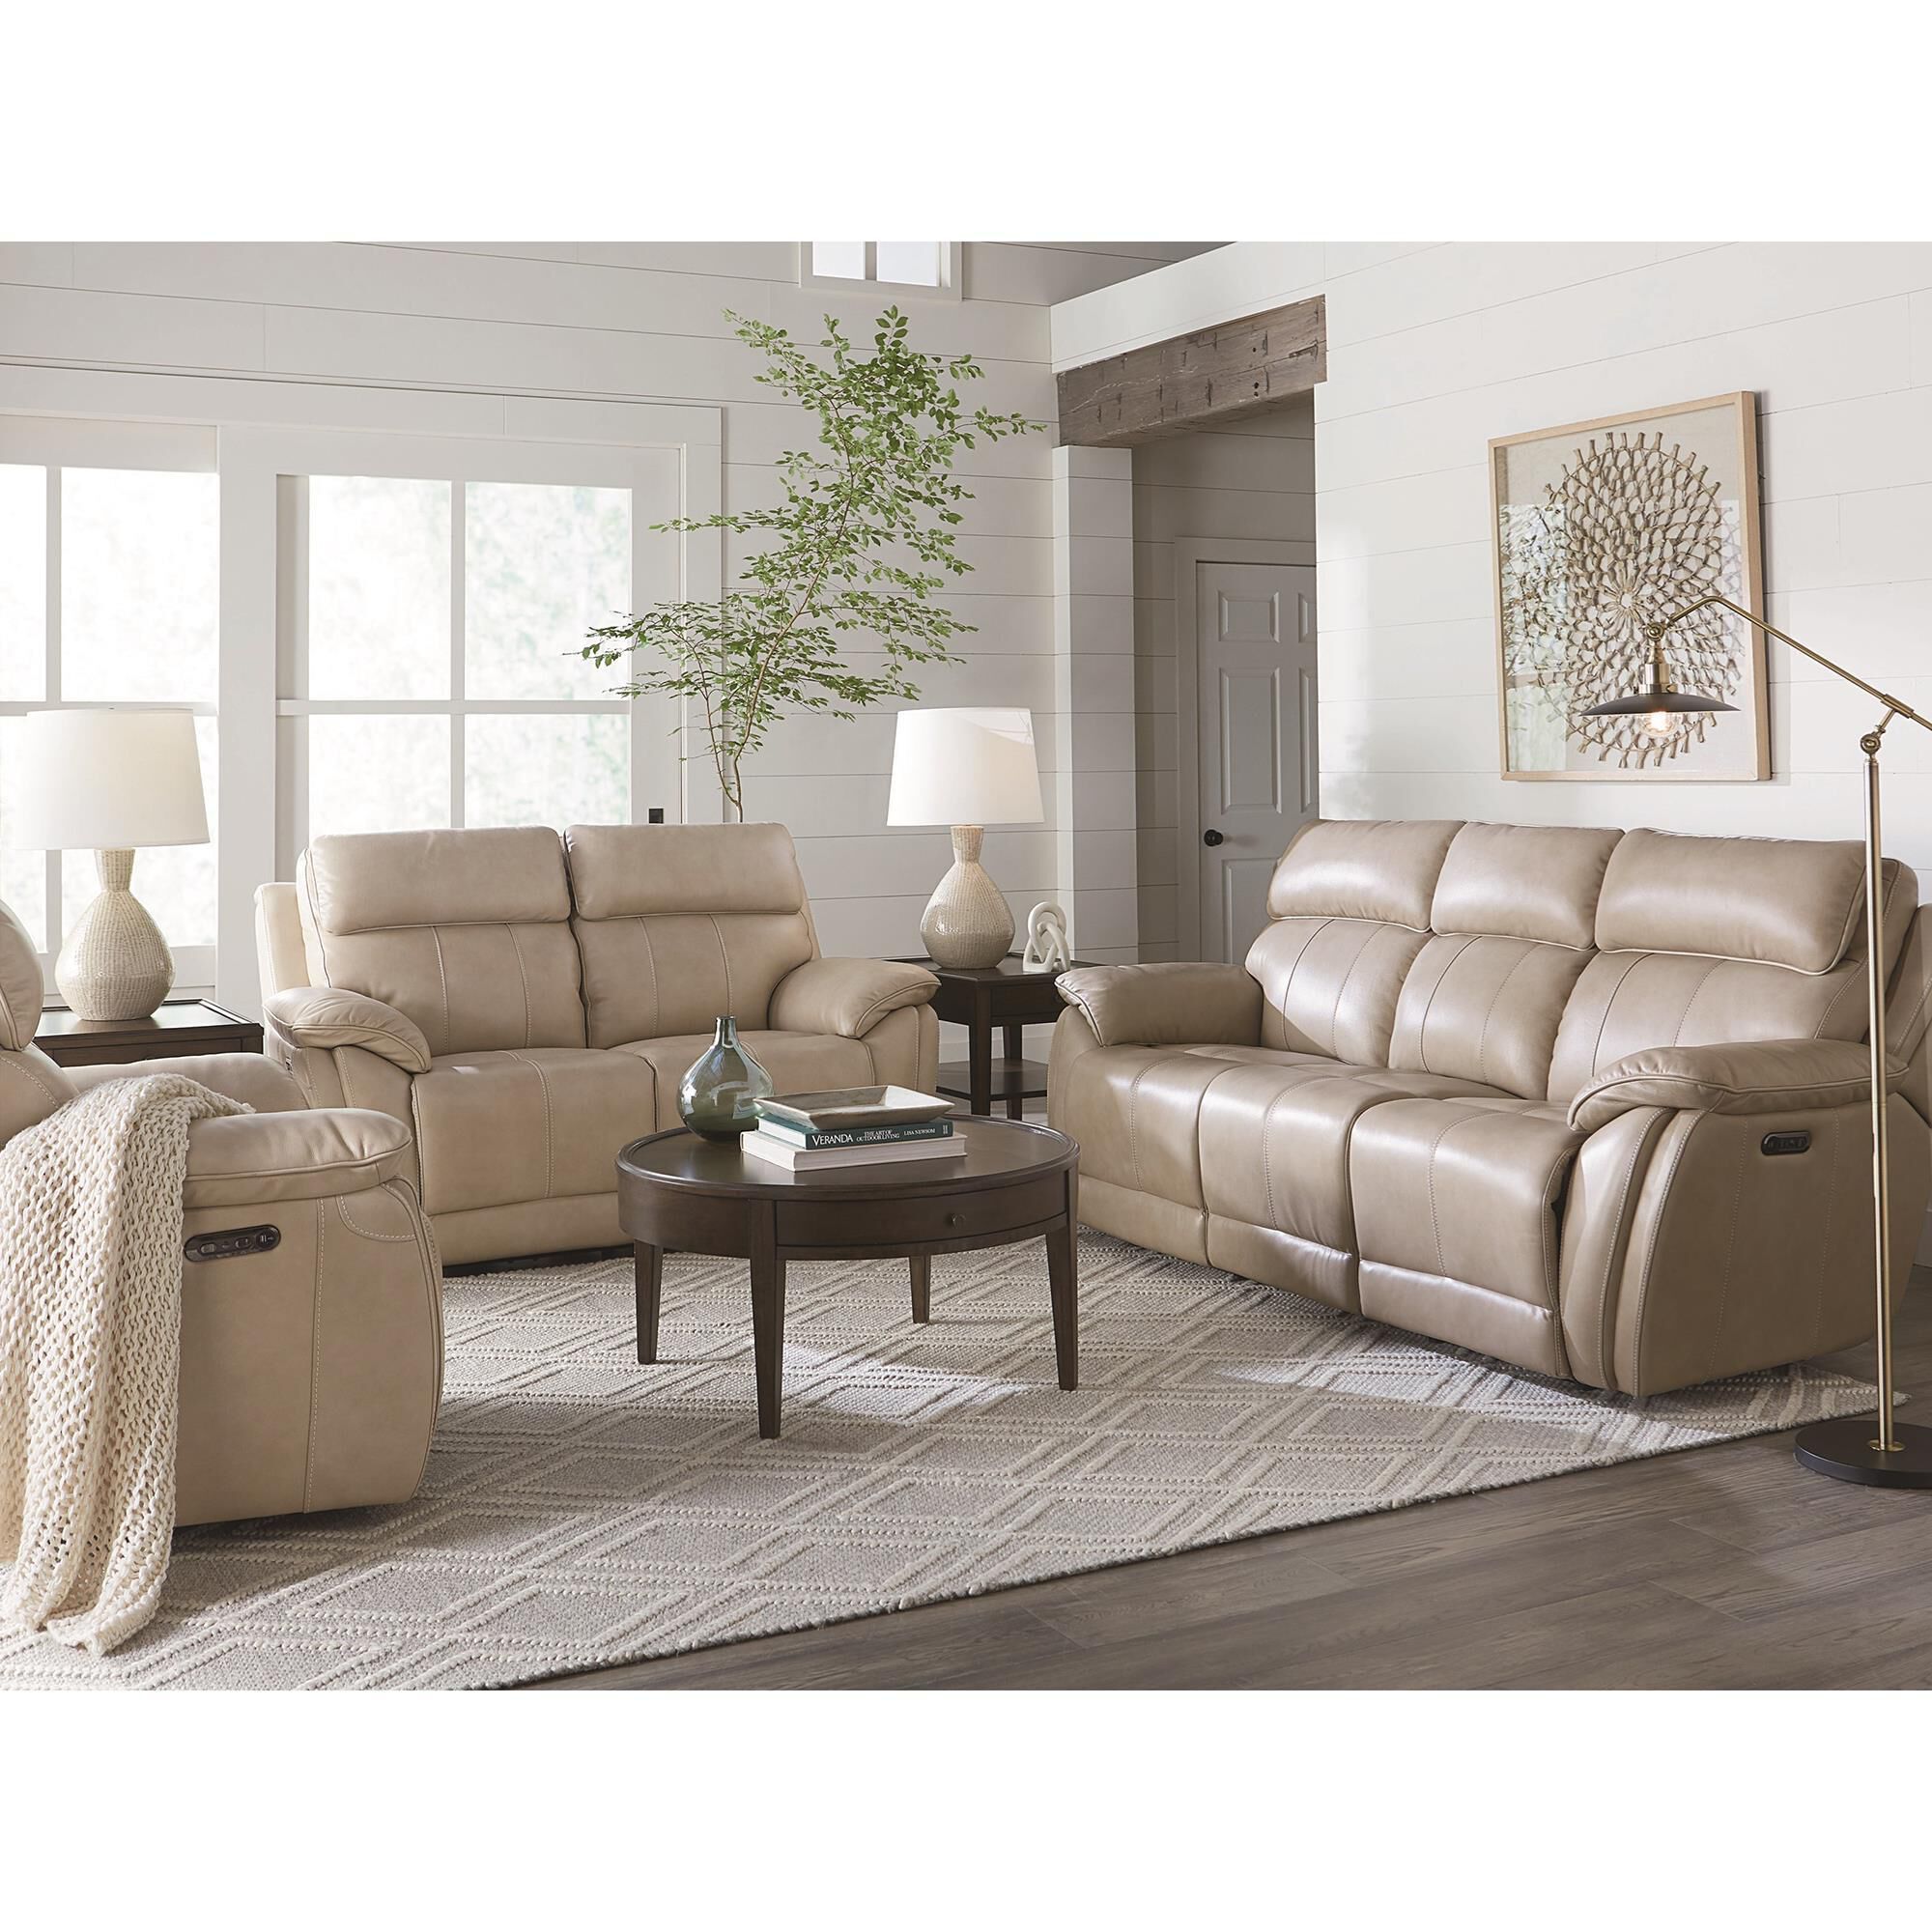 Make power loveseat a selection for your
  home sofa set